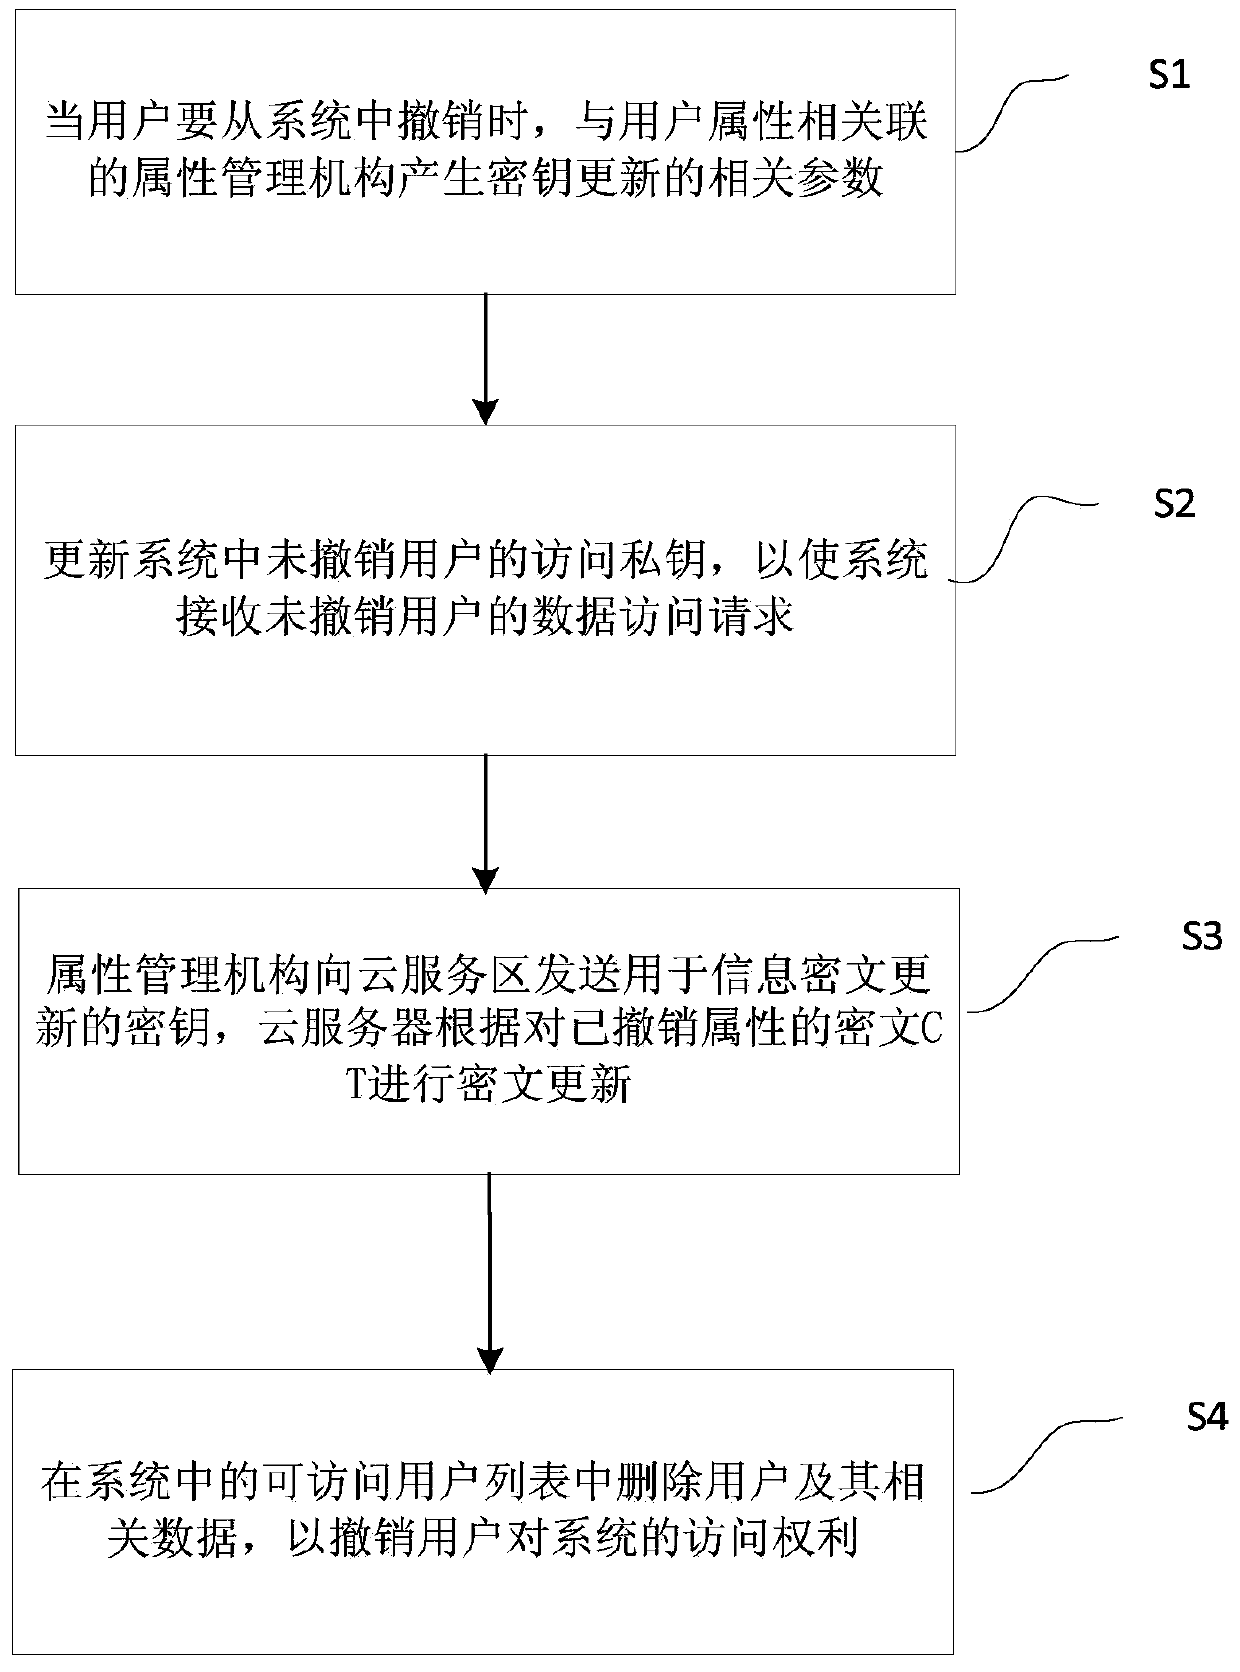 User revocation access control method based on proxy re-encryption